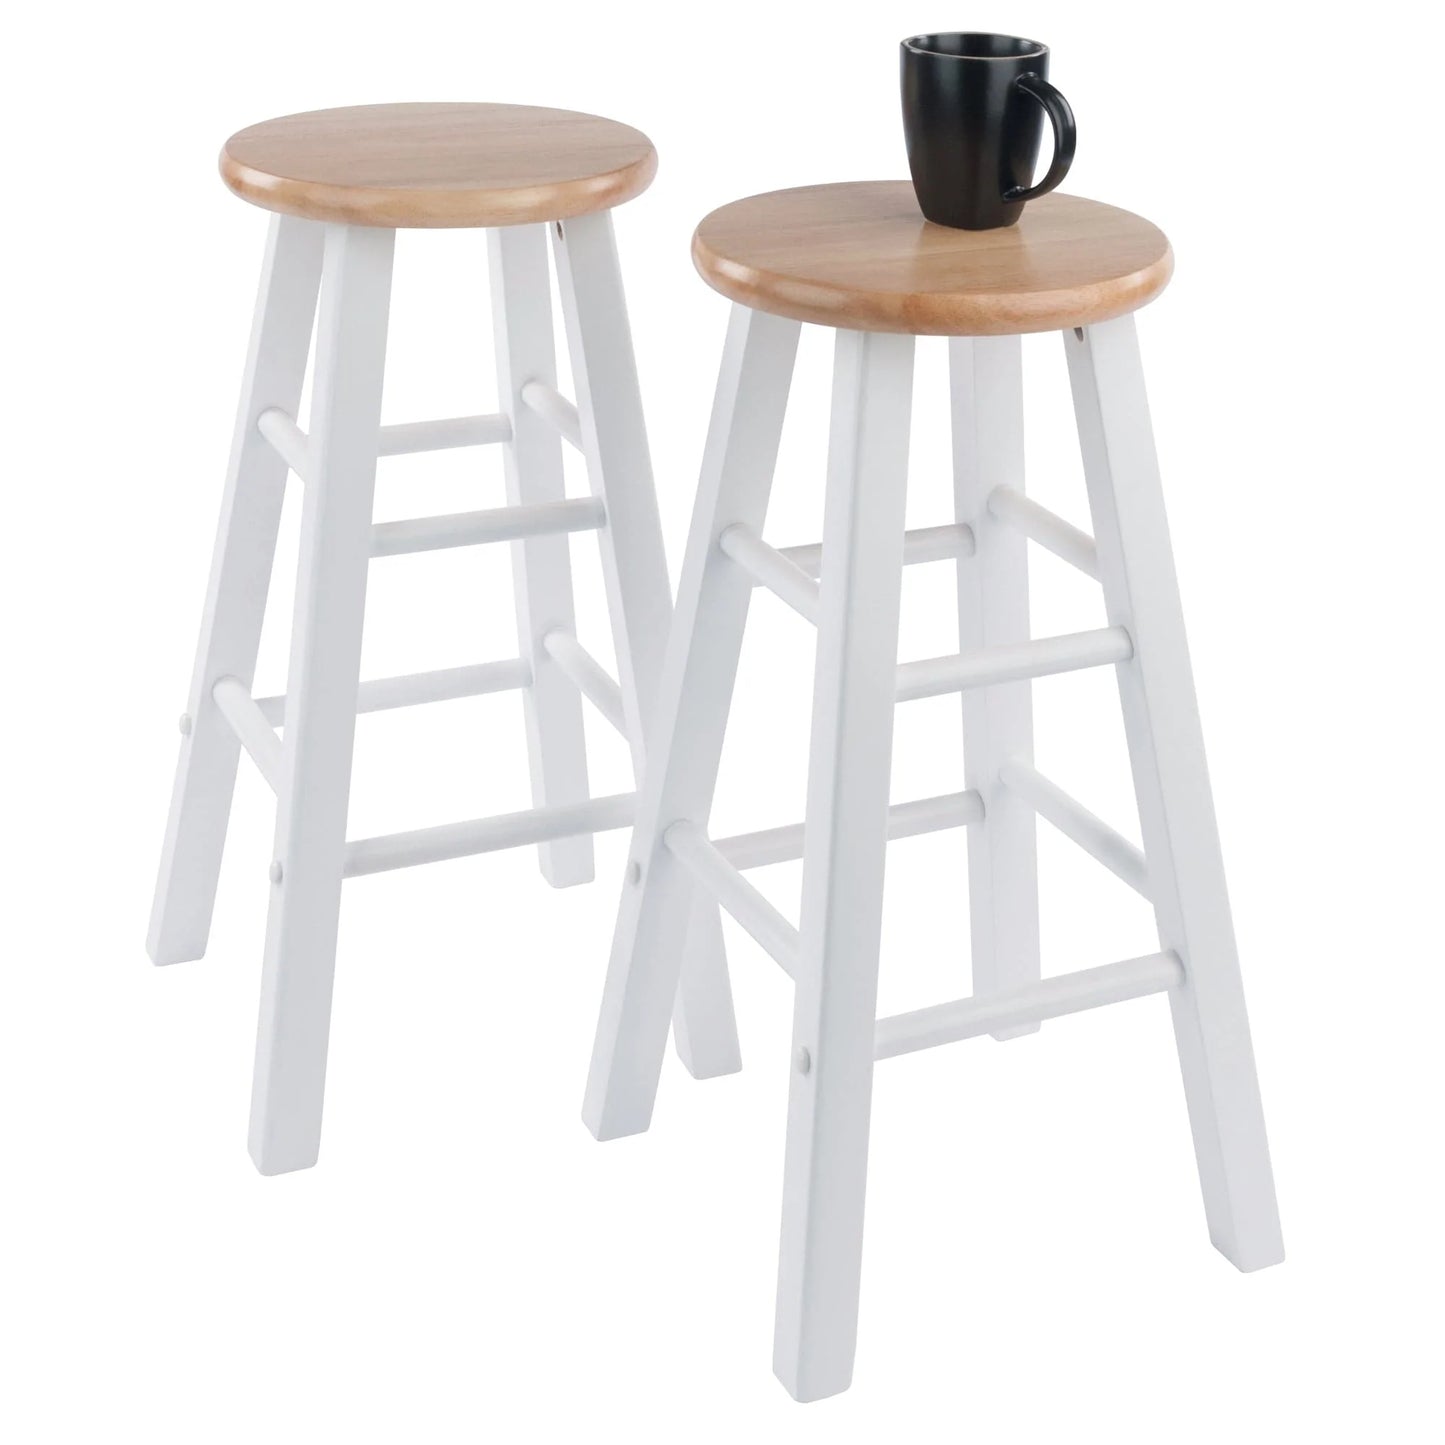 WINSOME Stool Element 2-Pc Counter Stool Set, Natural and White